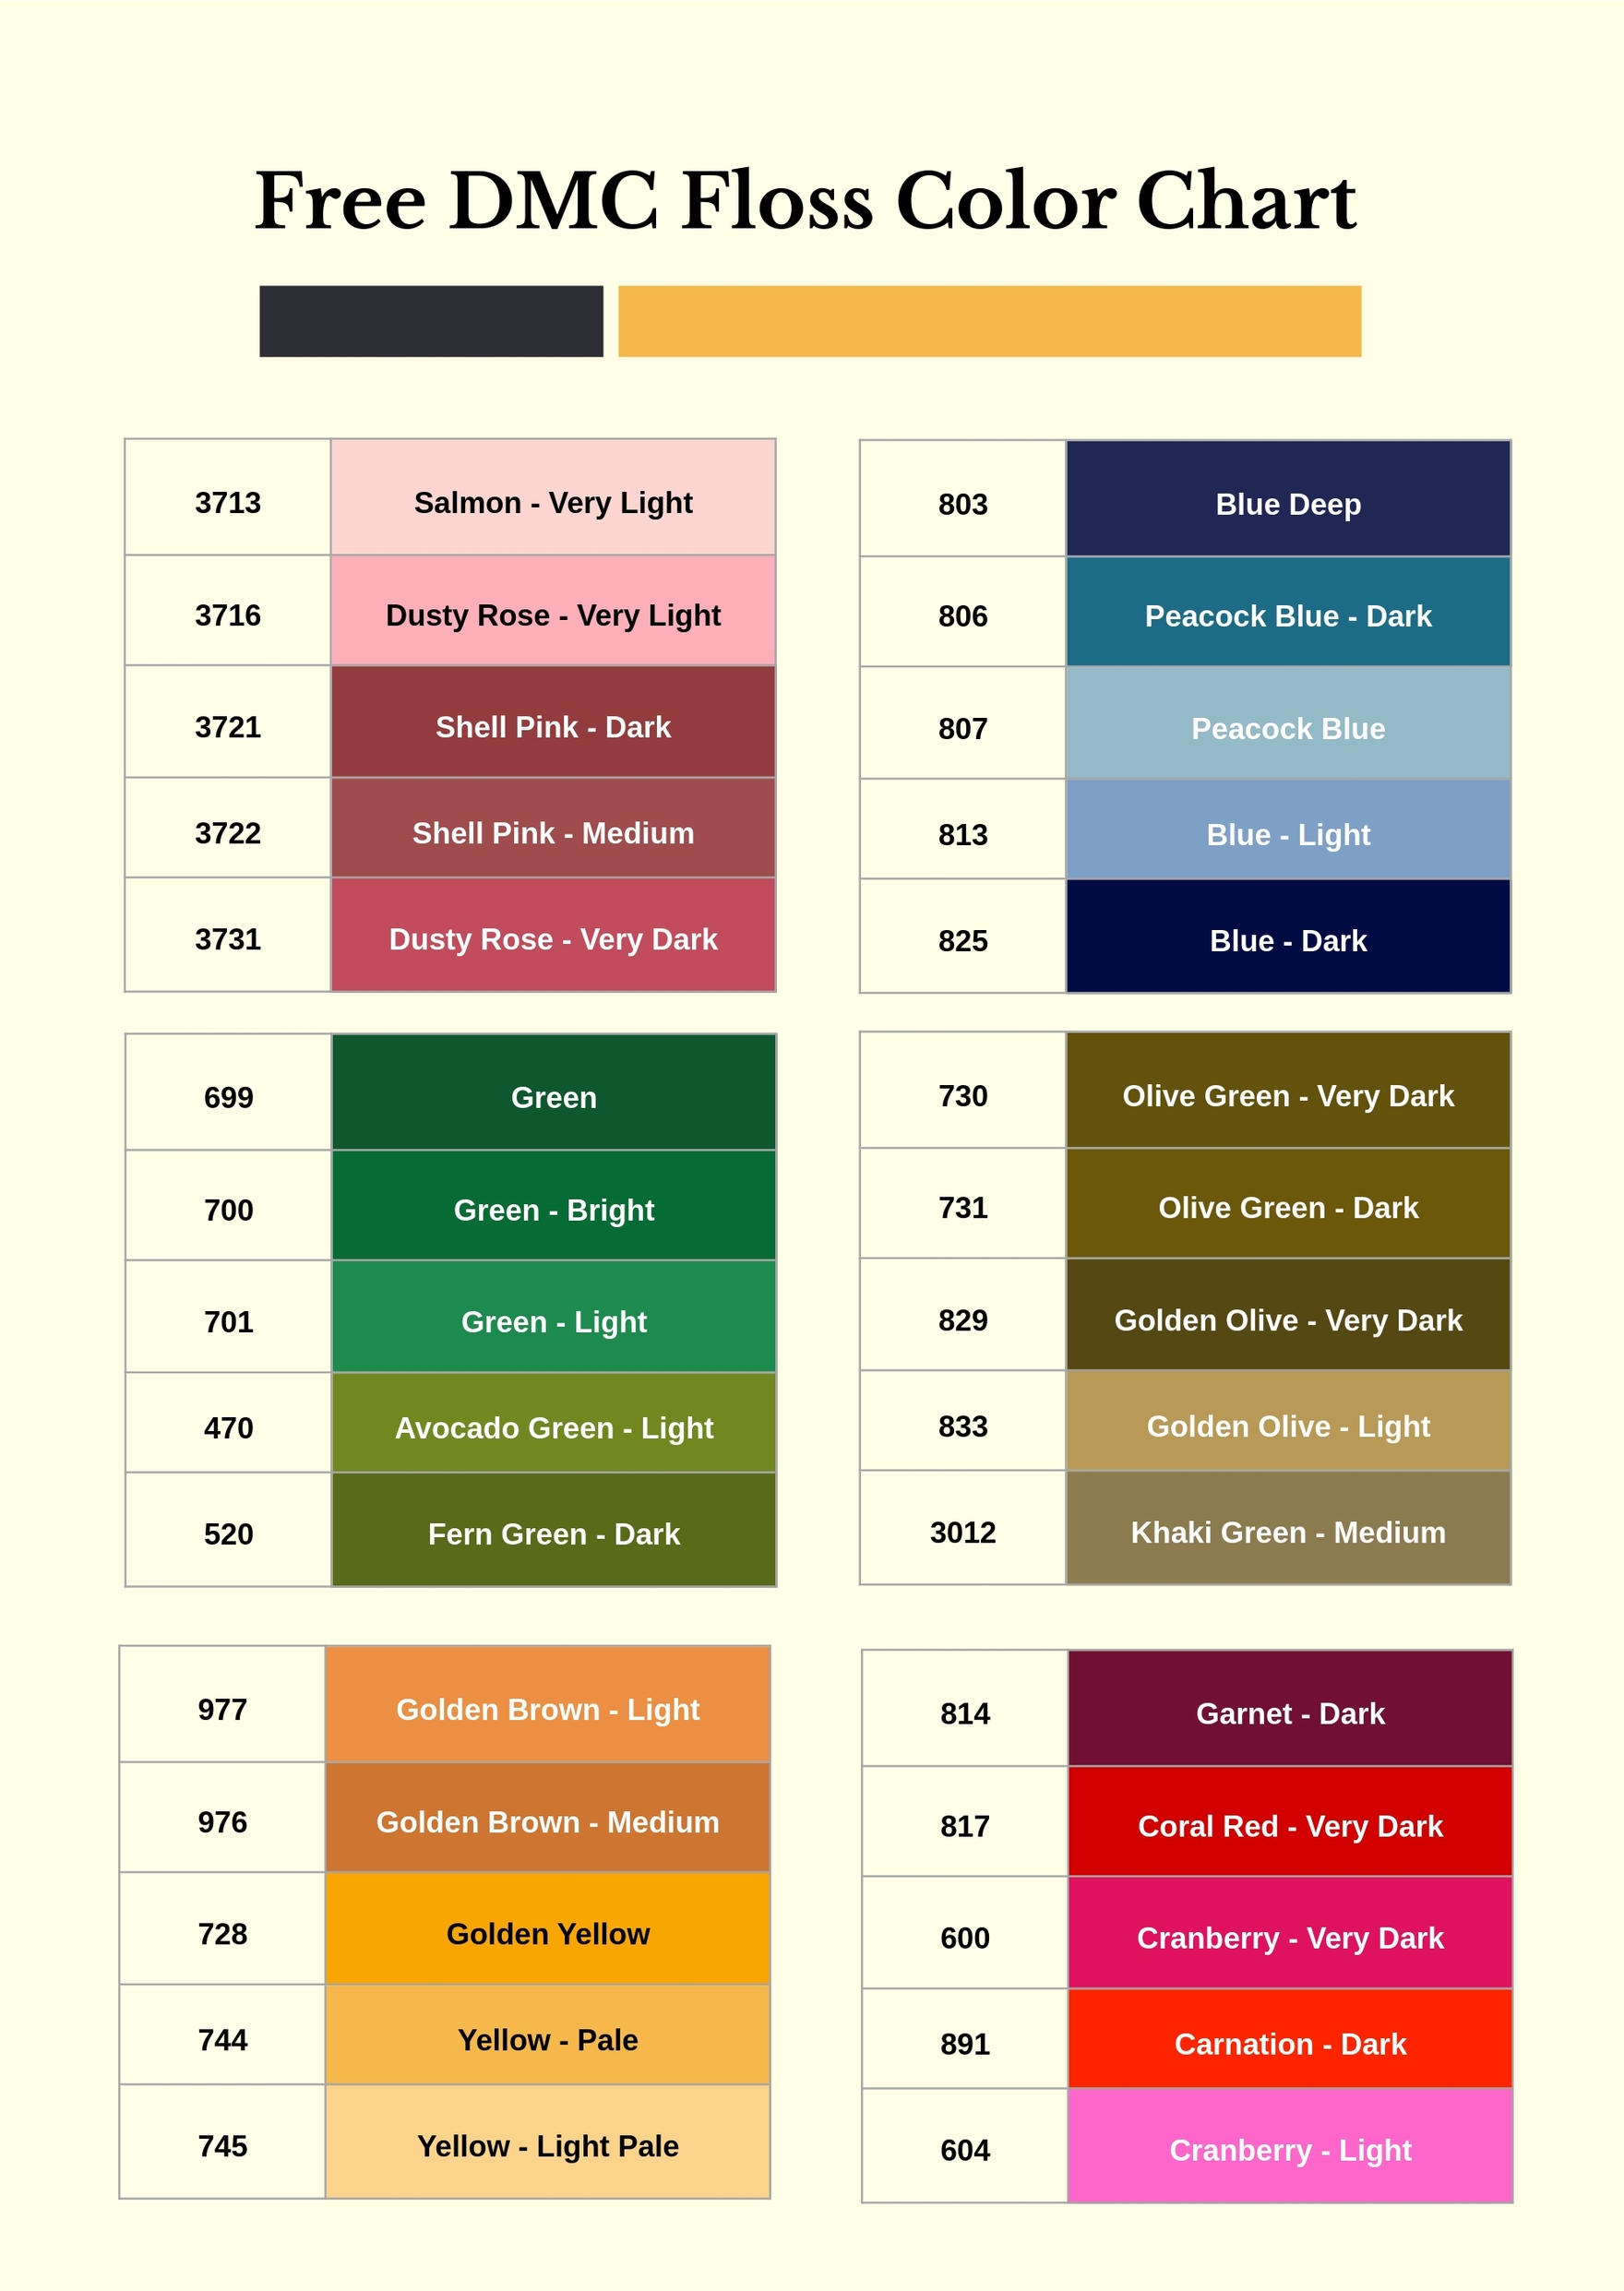 Free DMC Floss Color Chart Download In PDF Illustrator Template